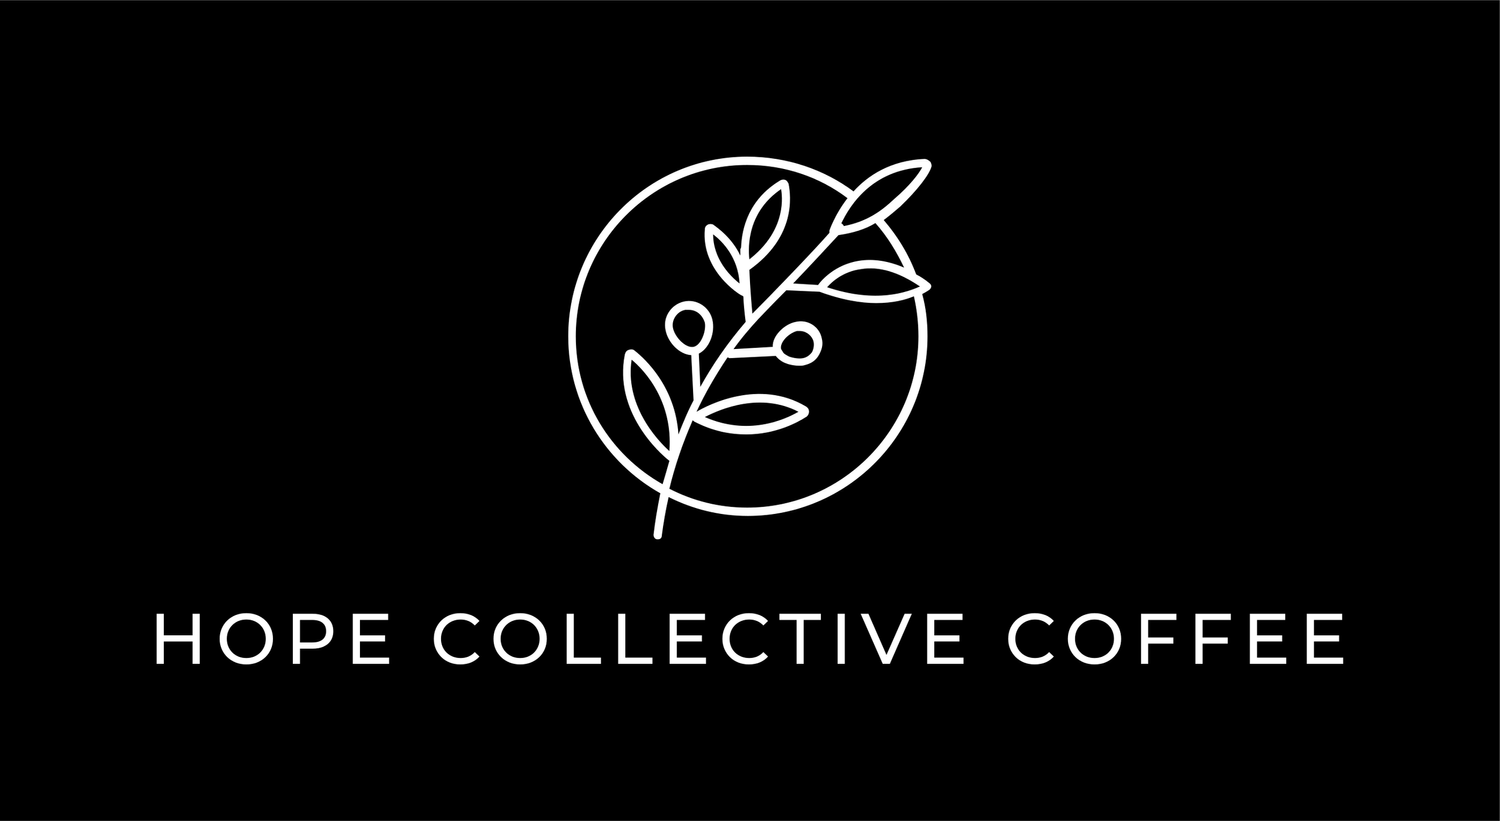 Hope Collective Coffee